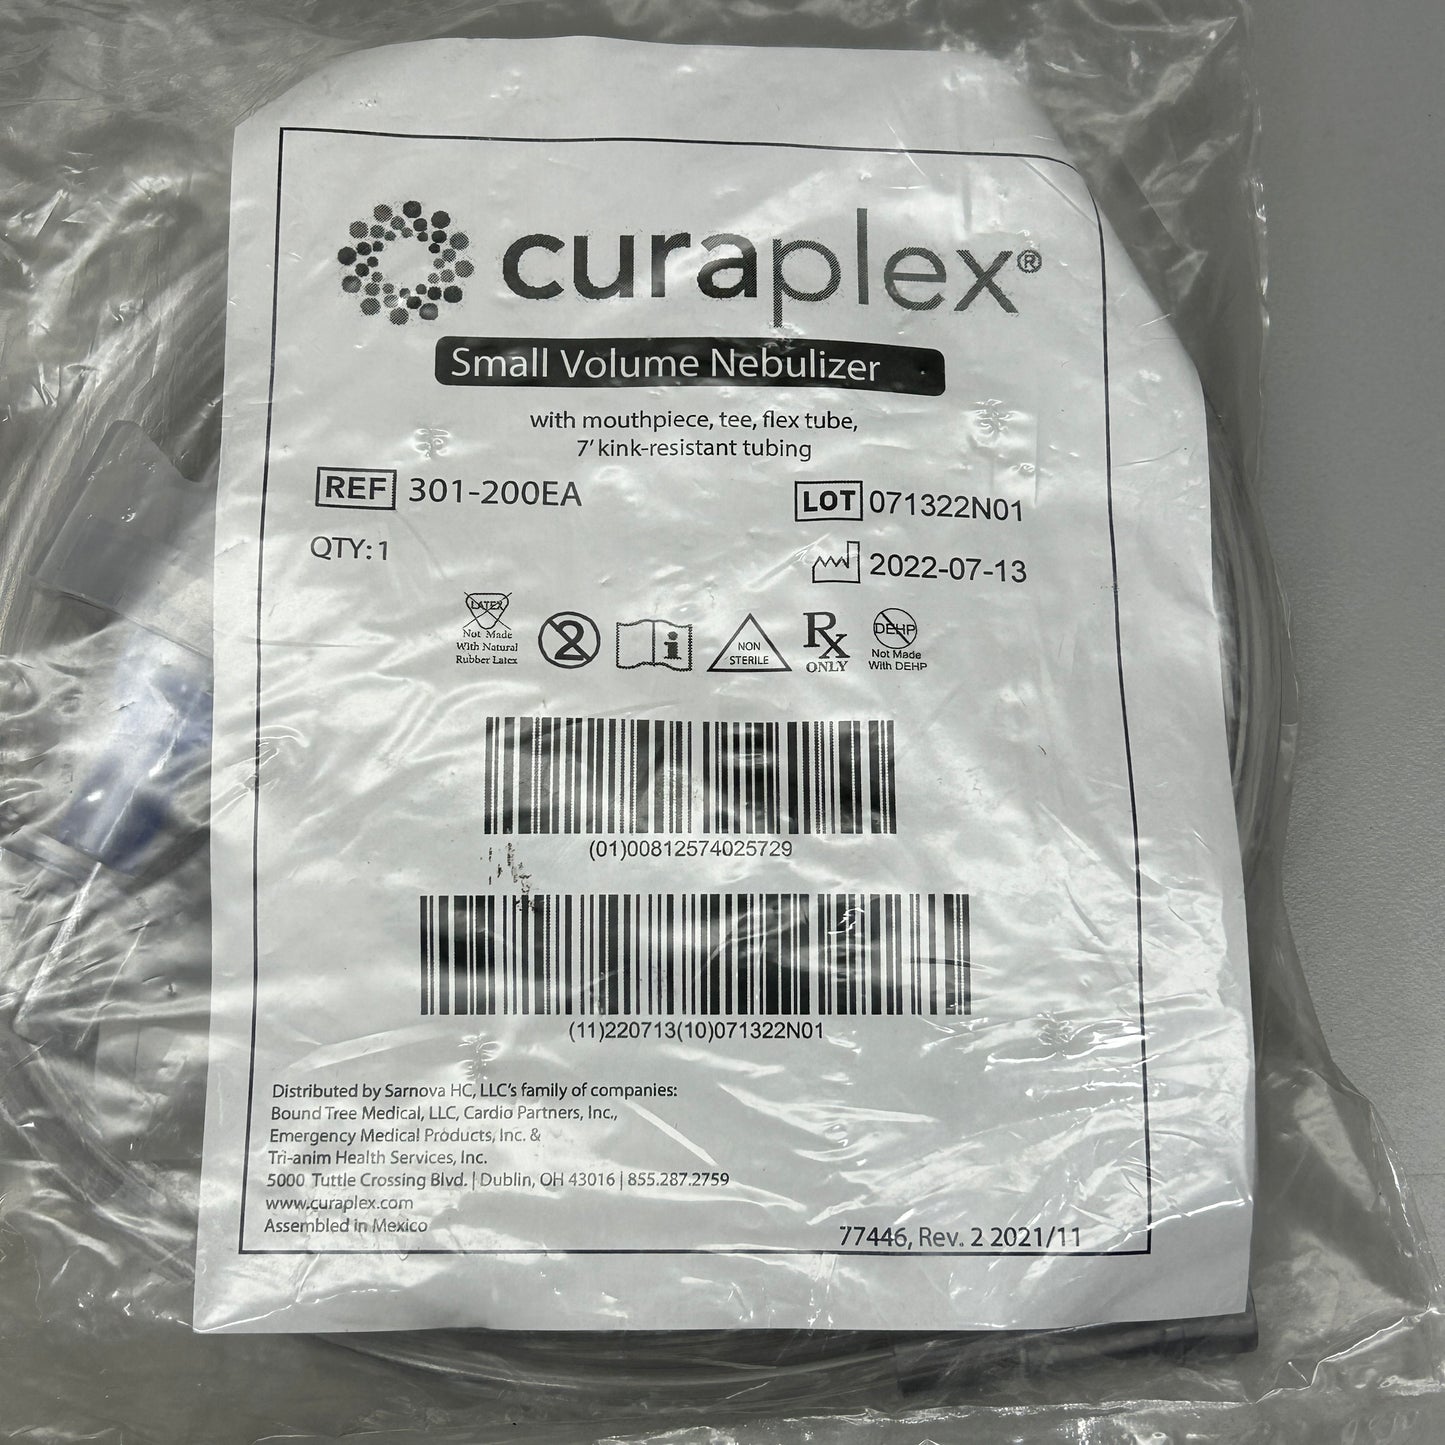 CURAPLEX 50-PACK! Small Volume Nebulizer with Mouthpiece, Tee, and Flex Tube (New)